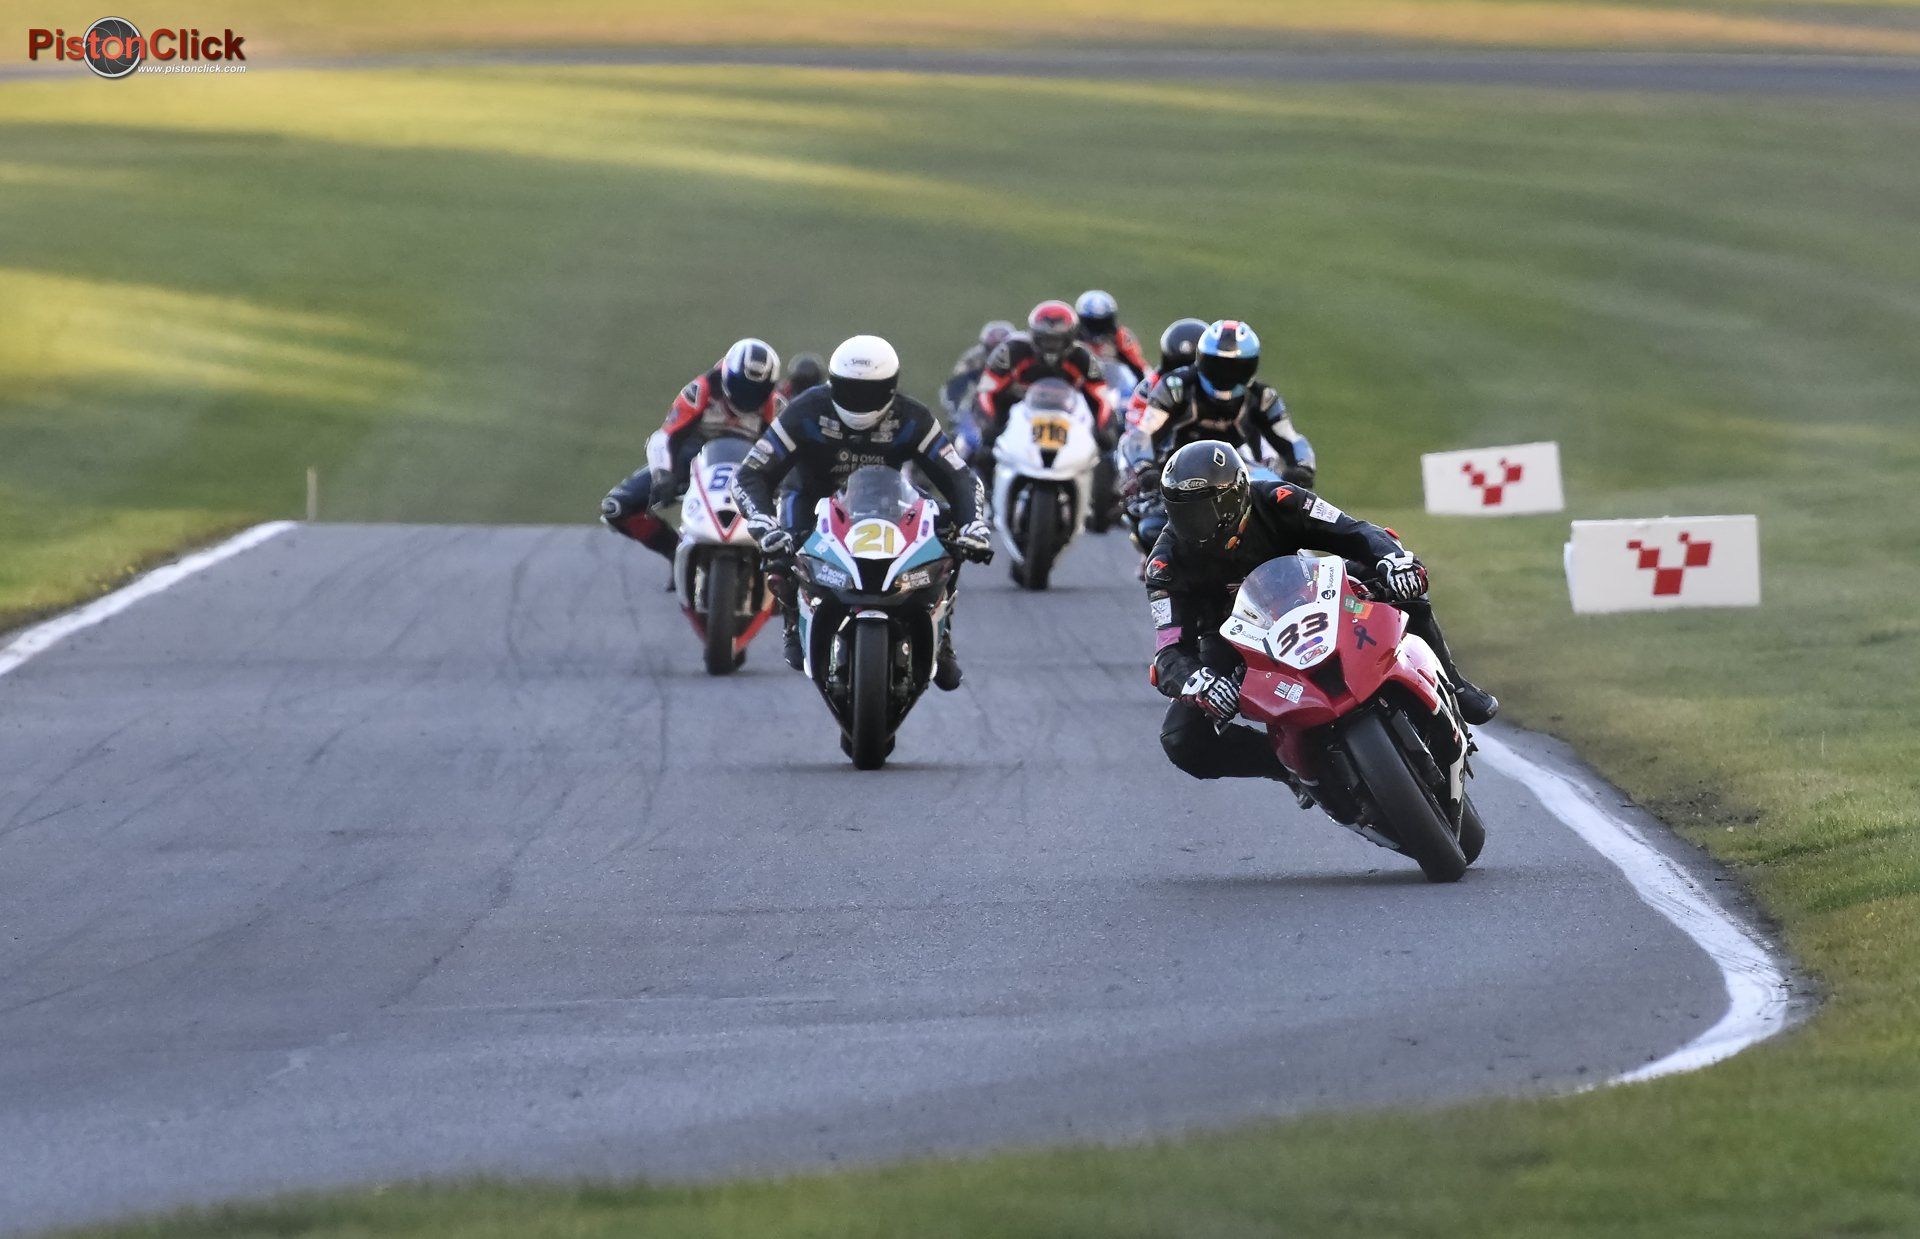 Thundersports and the Inter-Service Motorcycle Championship at Cadwell Park